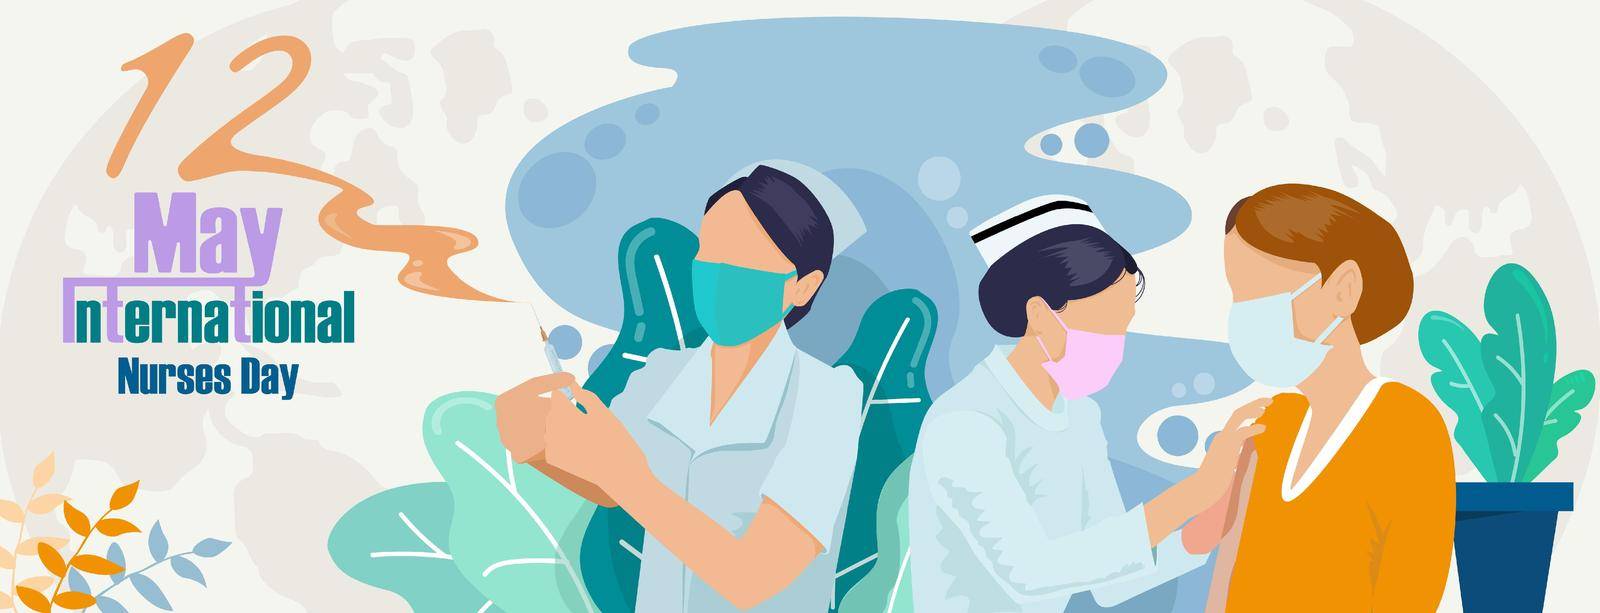 nurse day ,doctor and nurse - COVID-19 pandemic concept, vector illustration stock illustration